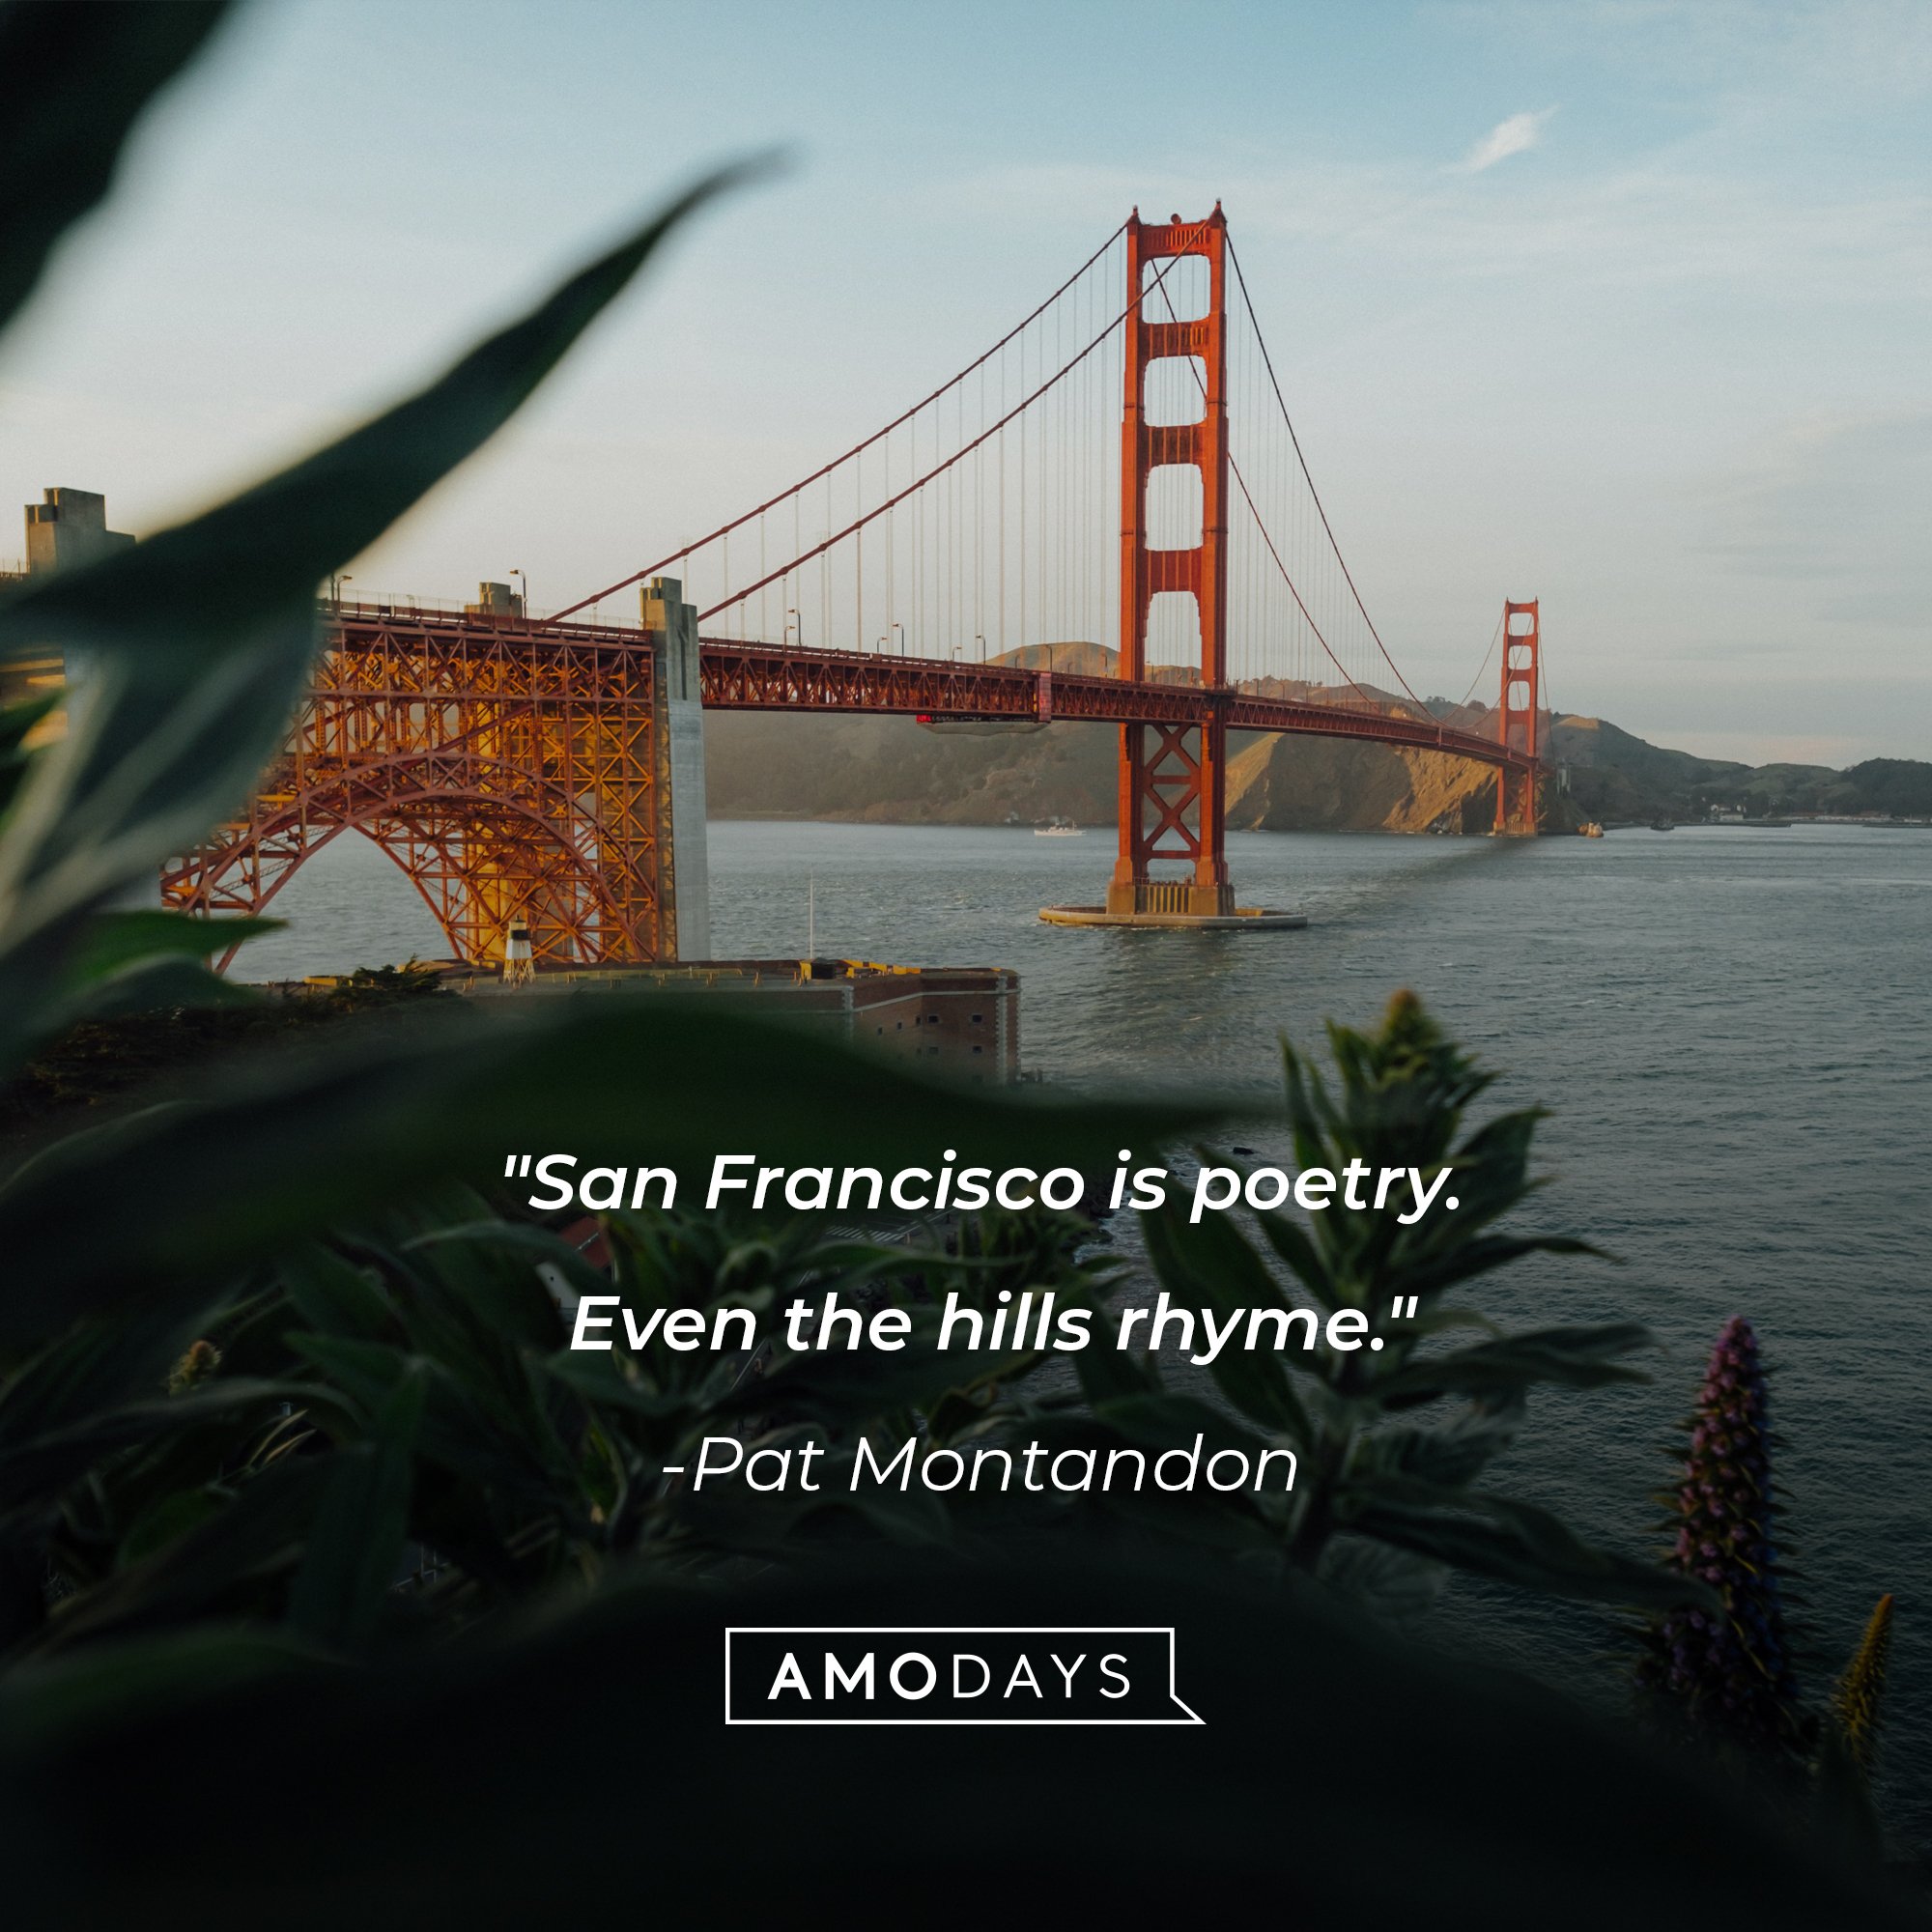 Pat Montandon’s quote: "San Francisco is poetry. Even the hills rhyme." | Image: AmoDays